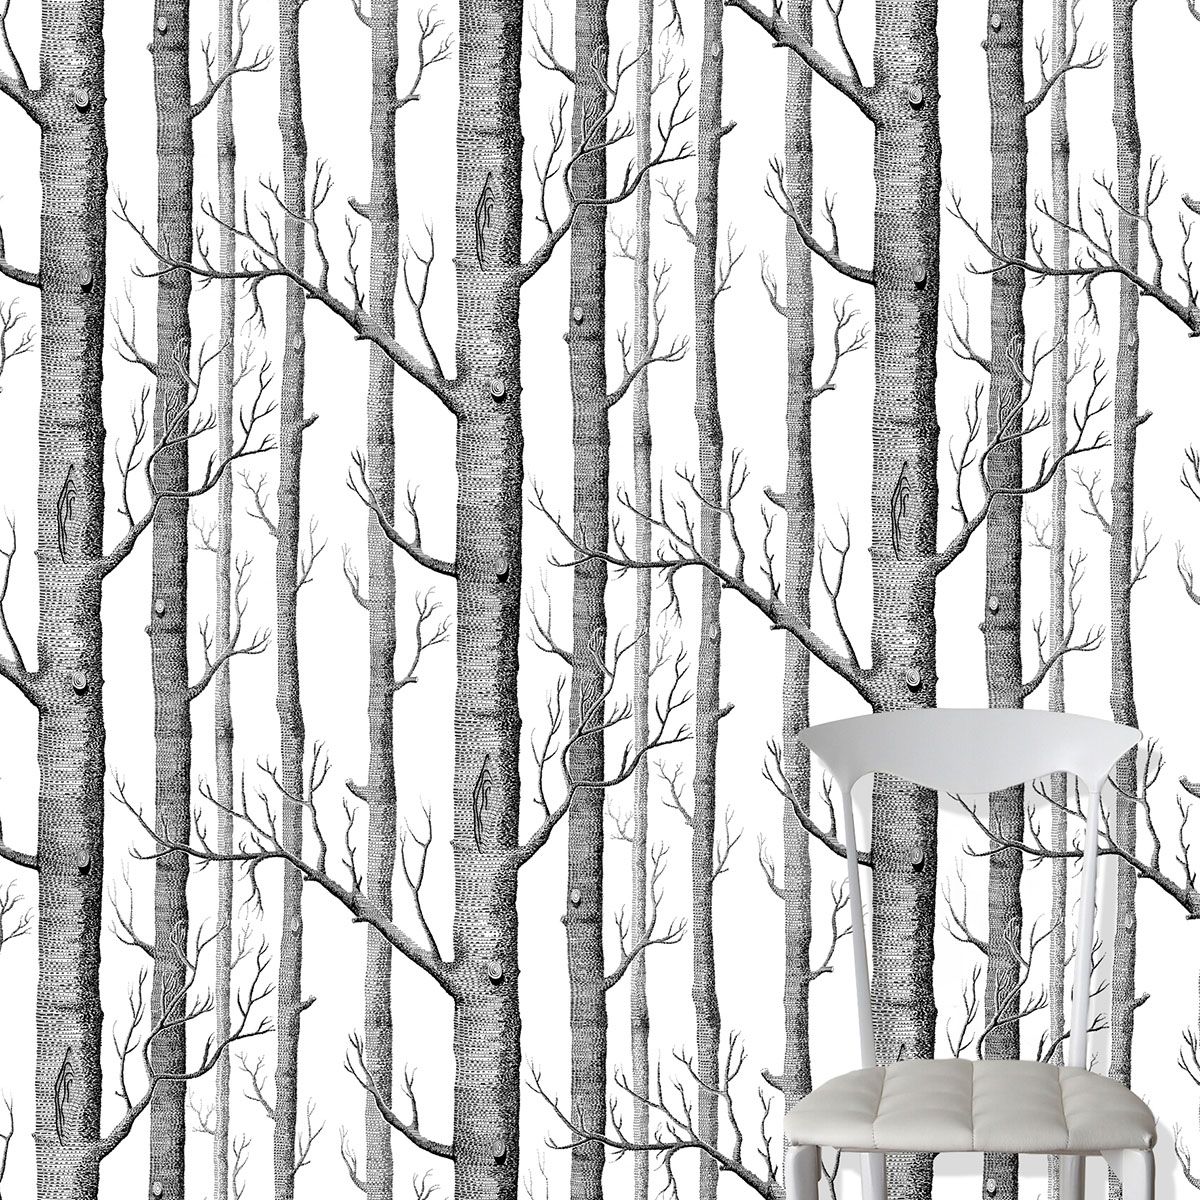 Woods 69 / 12147 - New Contemporary Two - Cole & Son